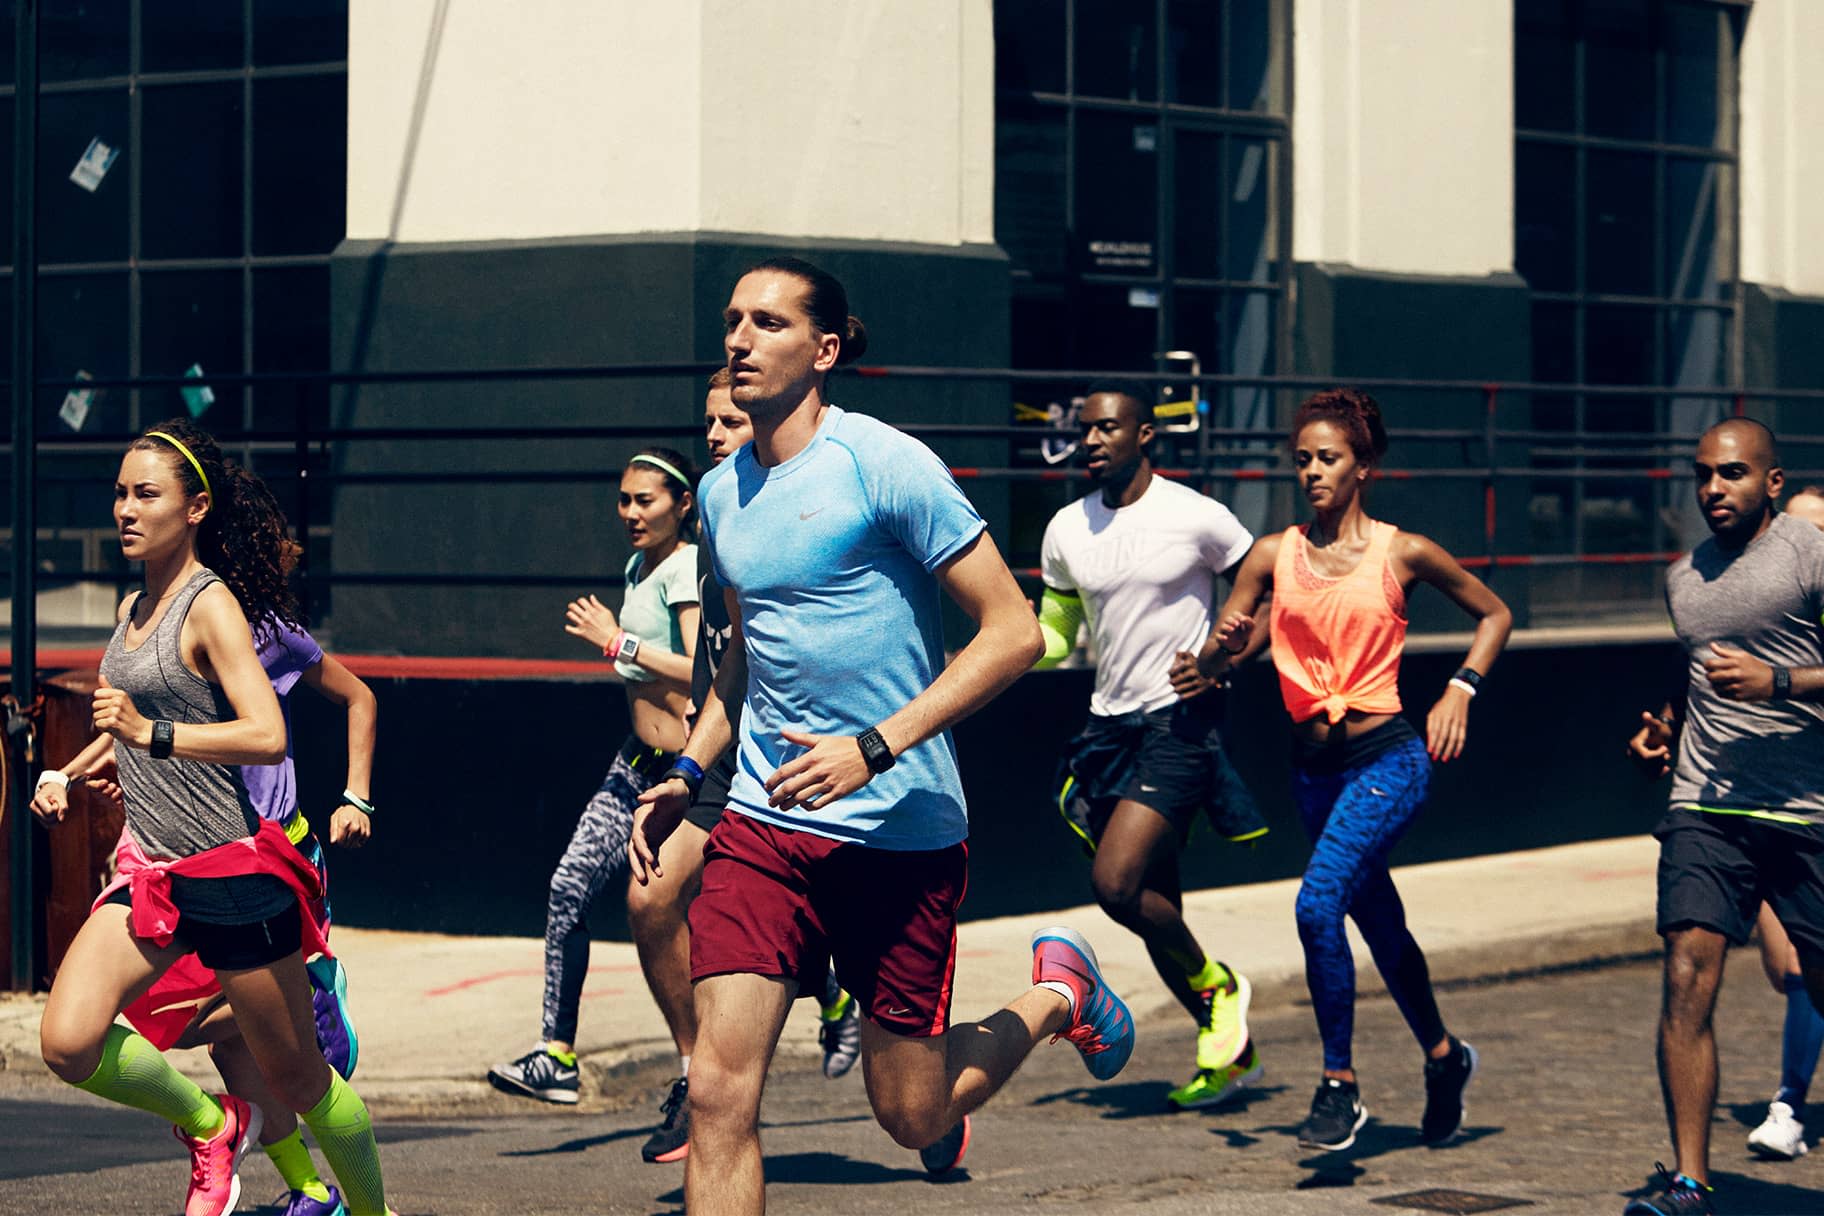 The Beginner’s Guide To Start Running, According to People Who Have Done It